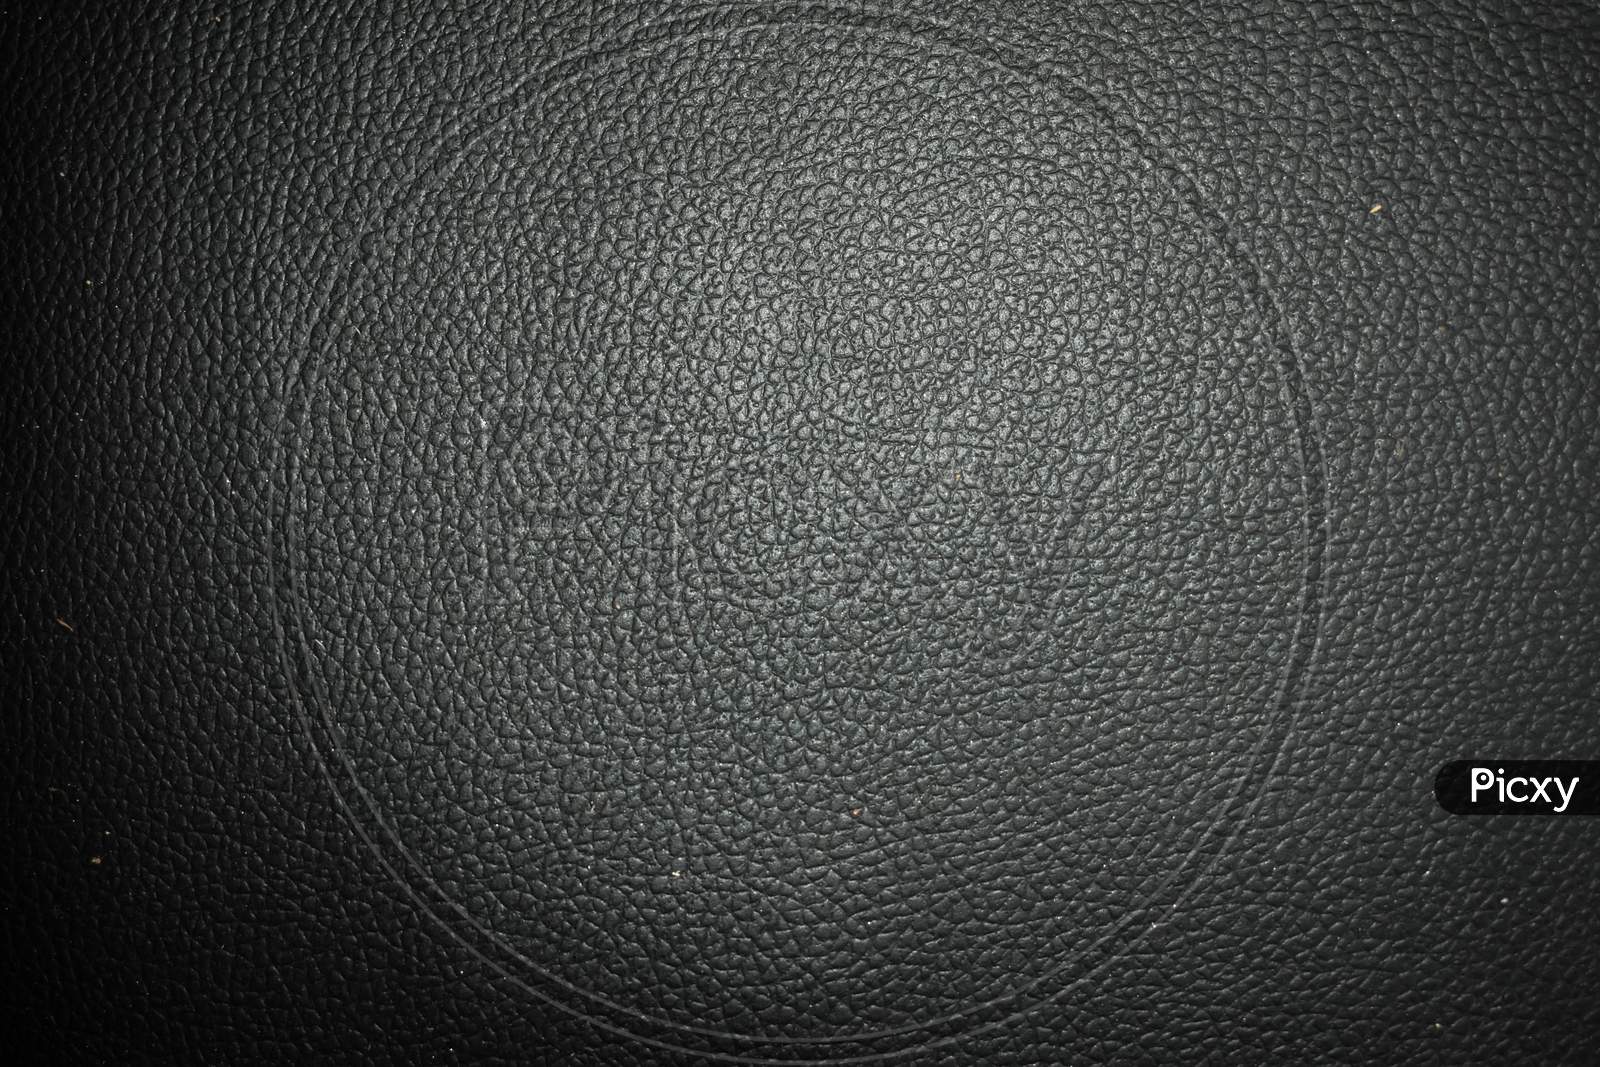 Black leather texture containing leather, texture, and black